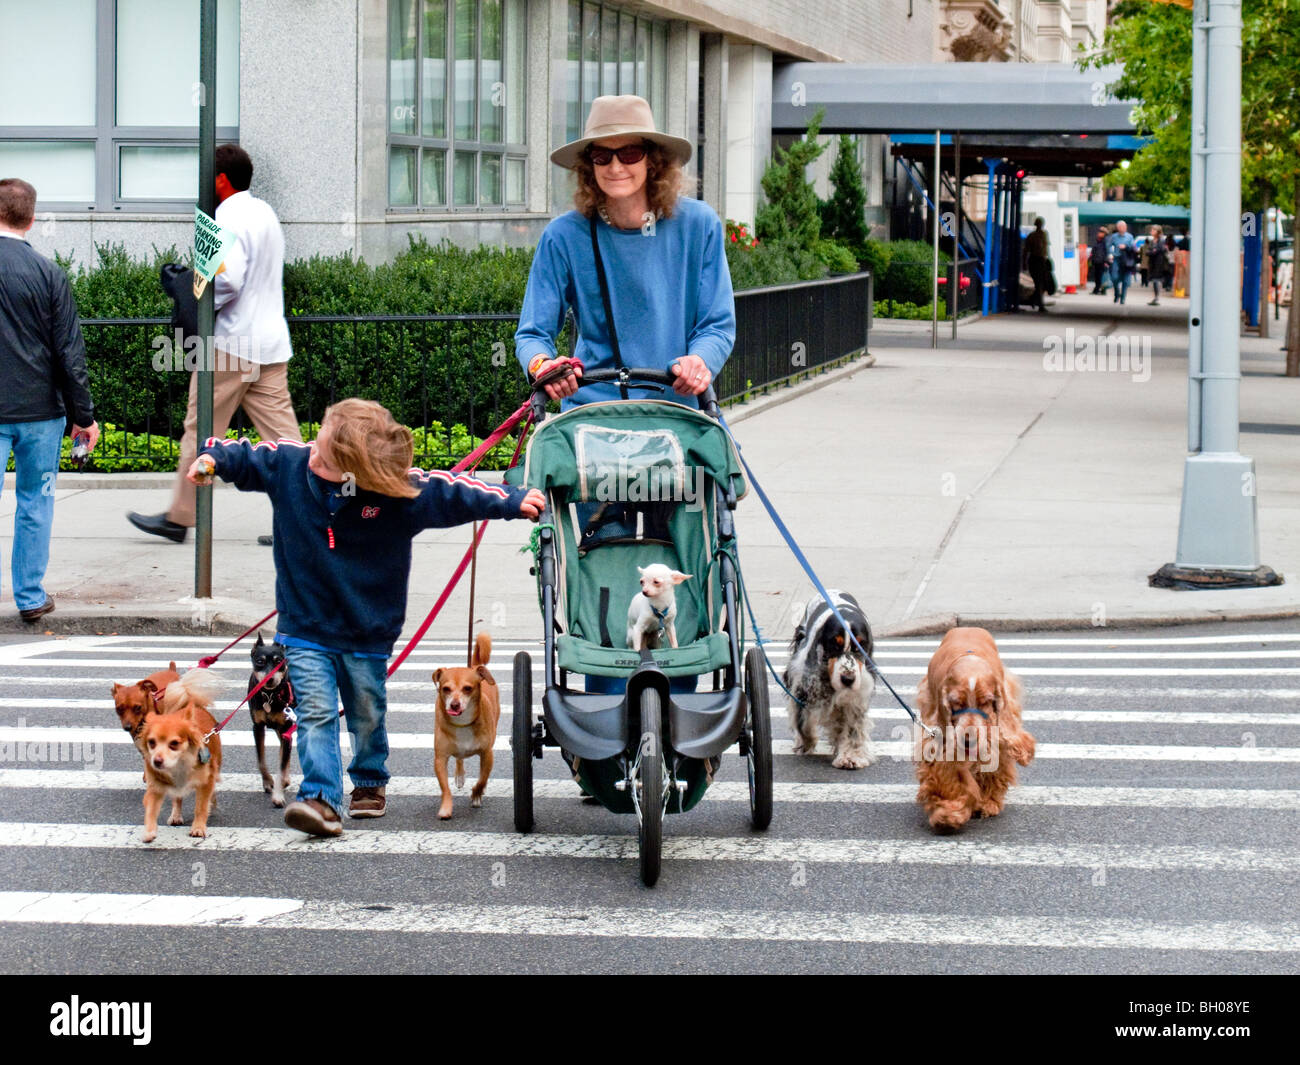 A professional dog walker handles seven pooches as she crosses Fifth Avenue in Manhattan, NY City. One dog has taken her son's p Stock Photo